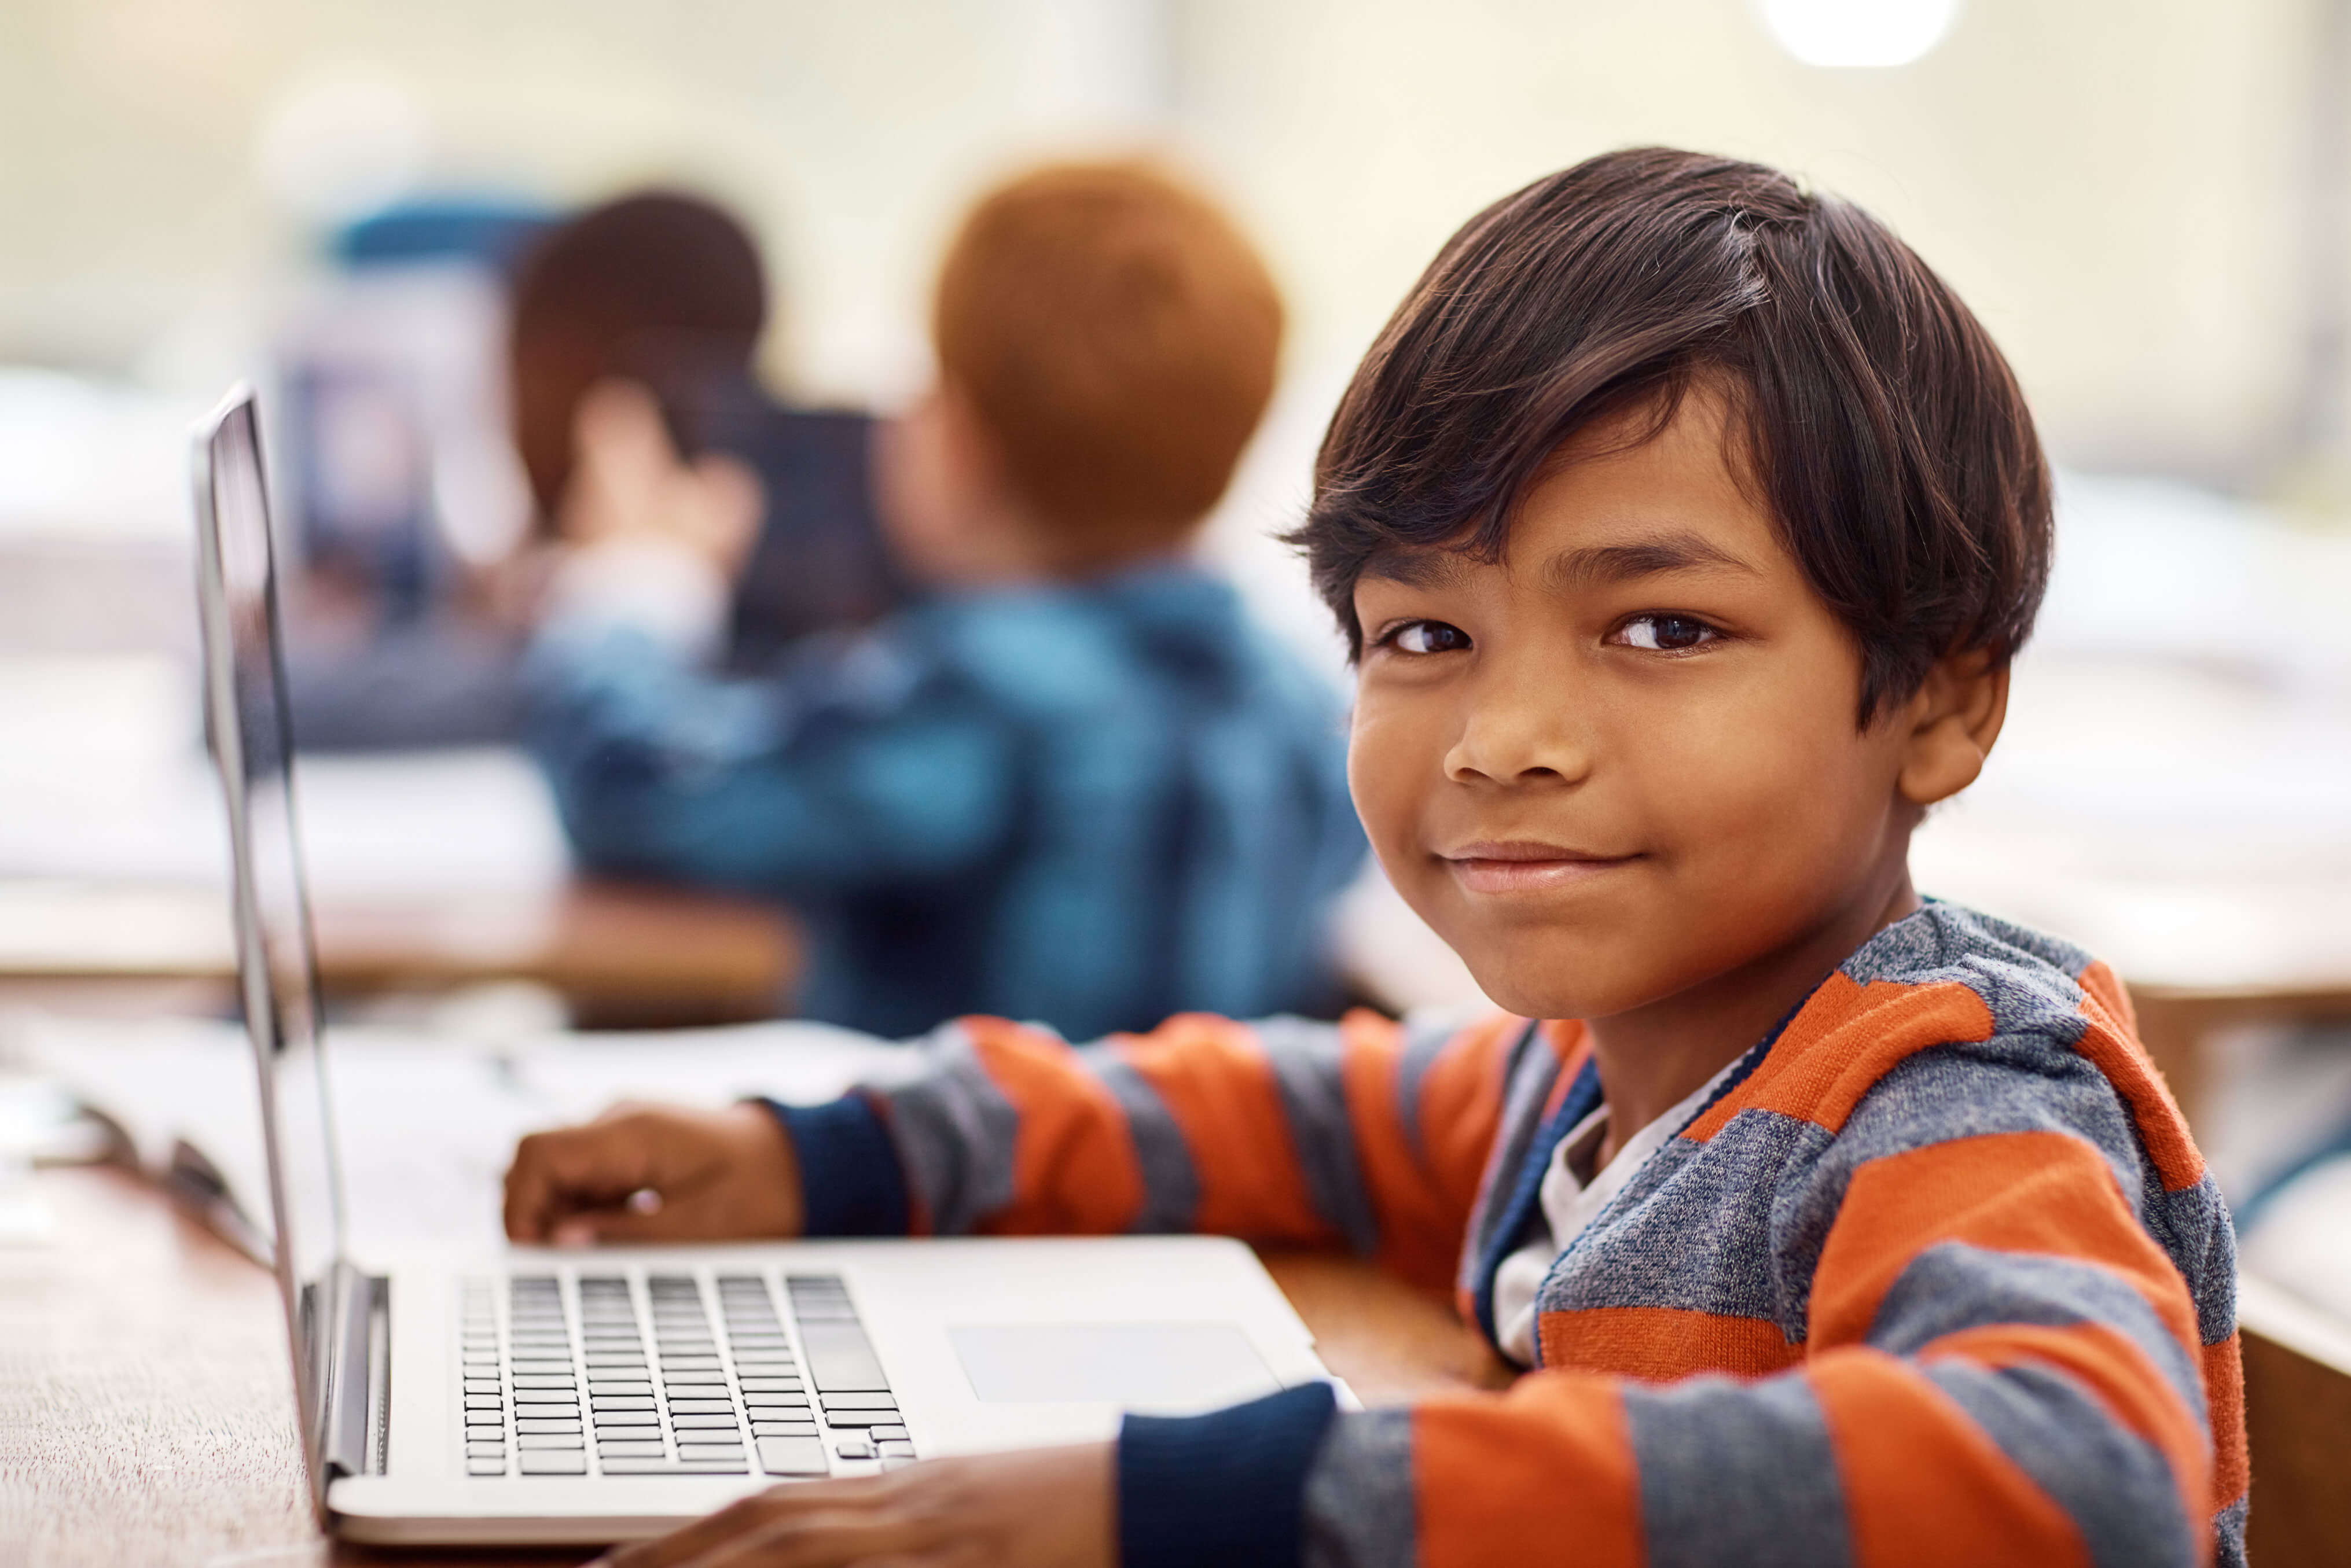 Portrait of an elementary school boy using a laptop while working in class